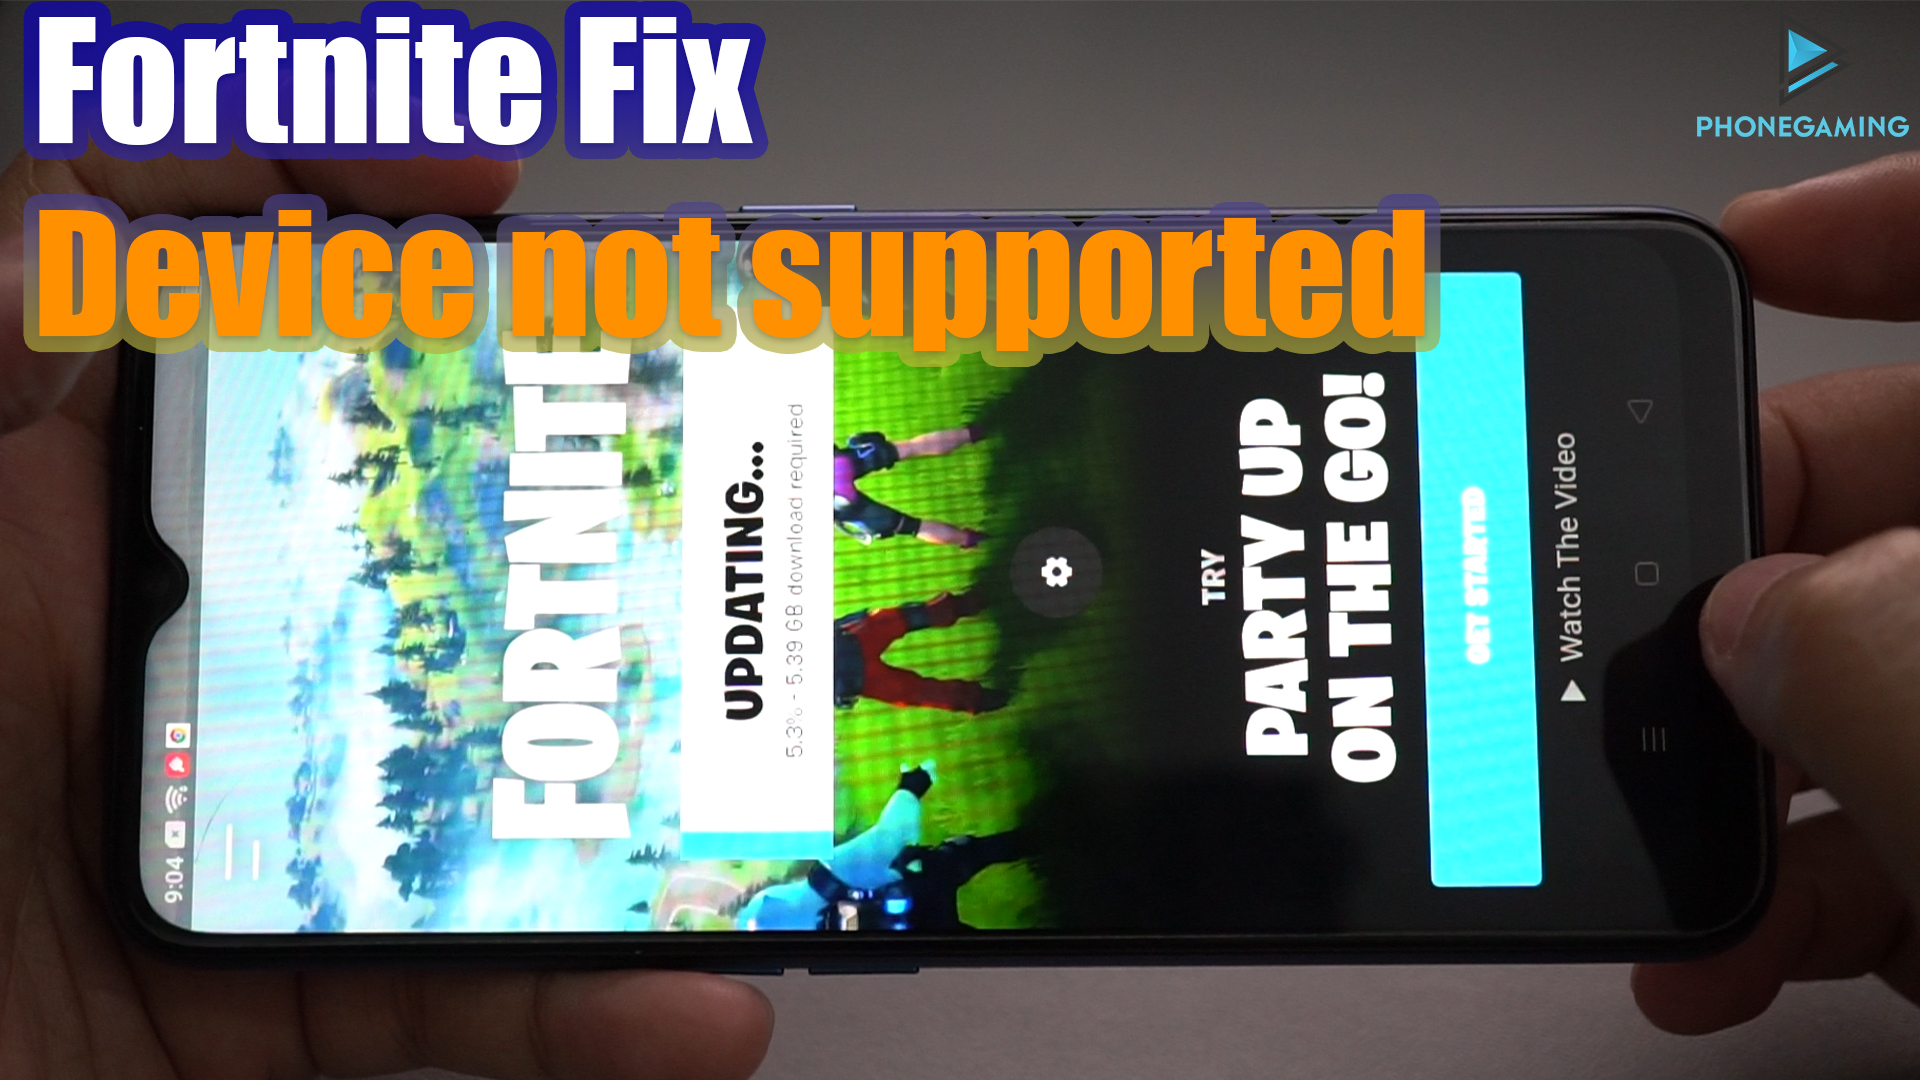 How To Install Fortnite Apk Fix Device Not Supported For Android